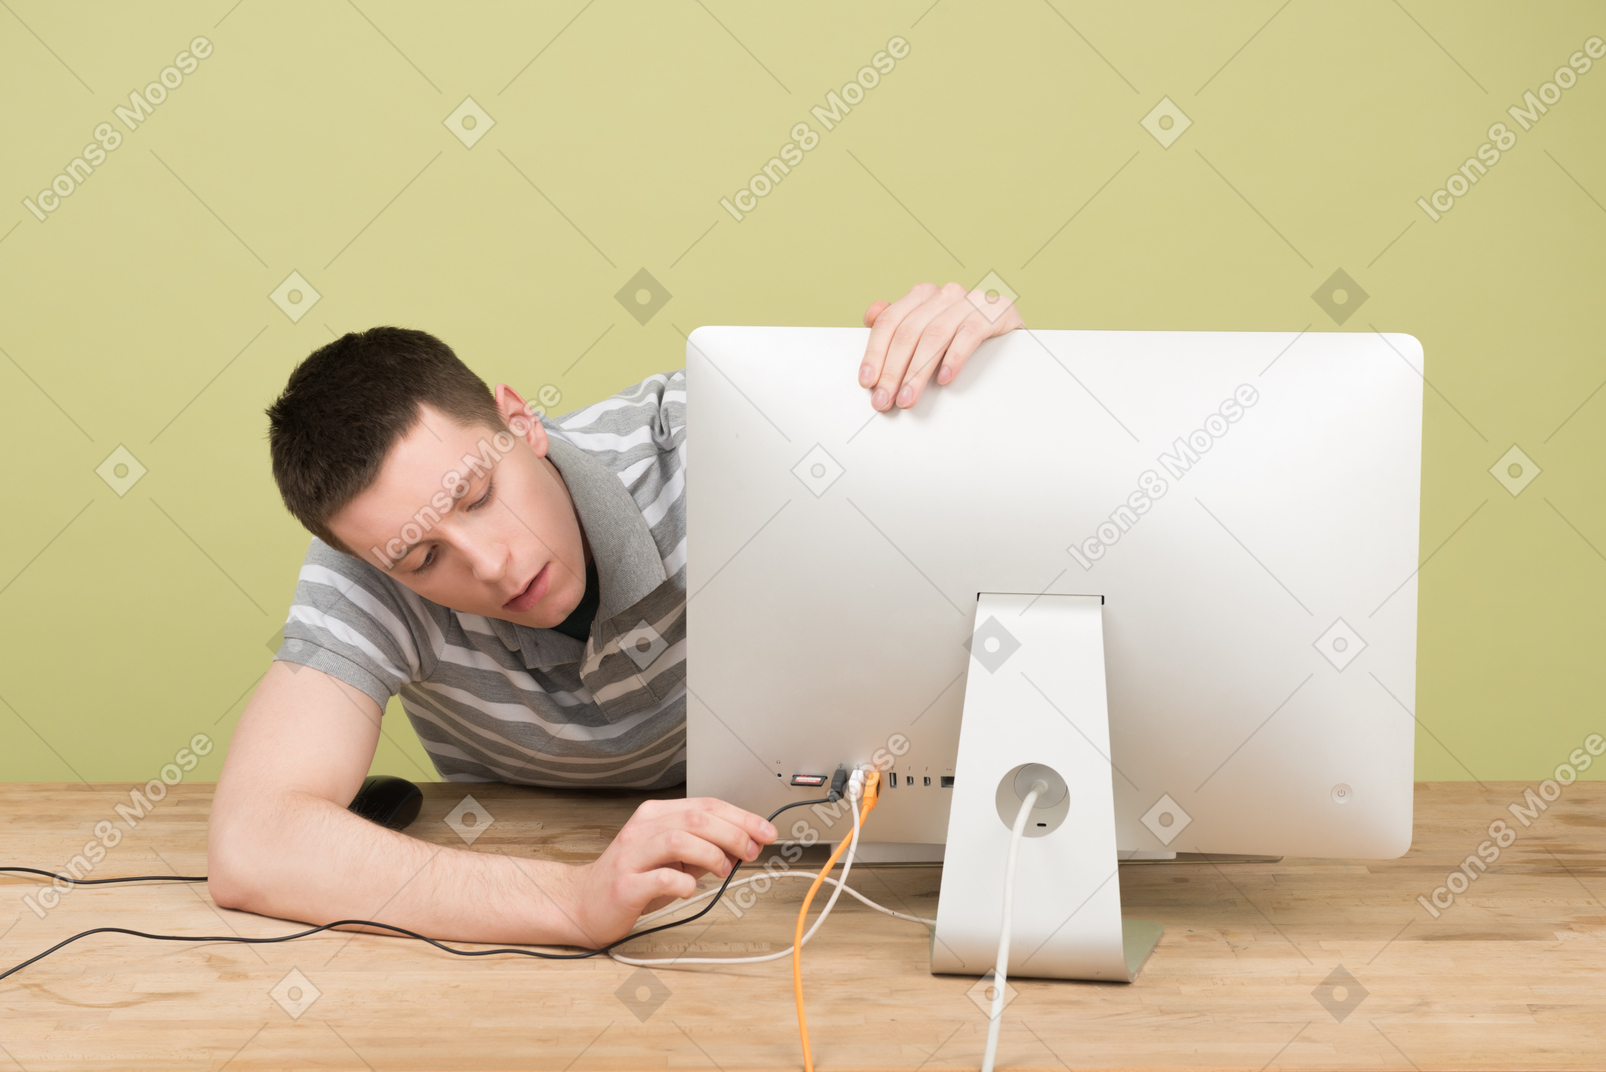 Man putting a computer cable into a socket